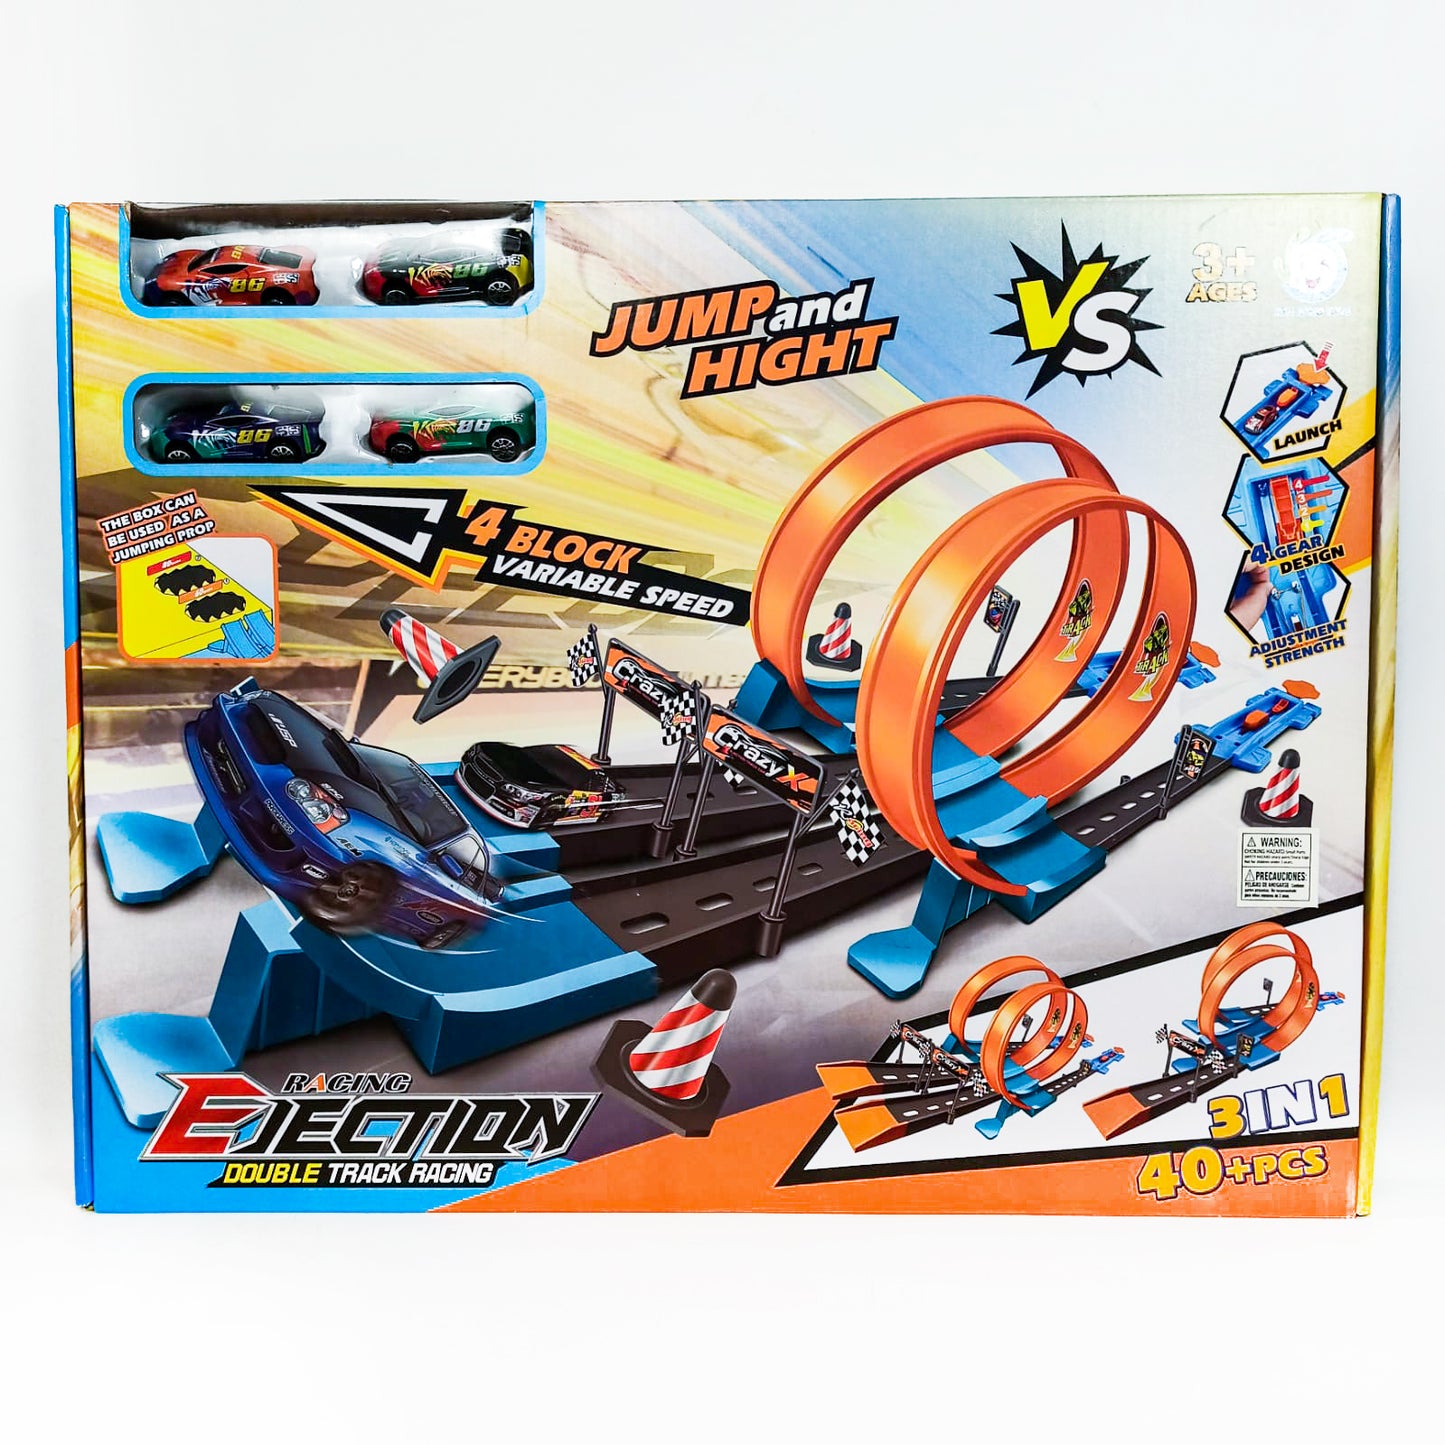 Stunt Speed Double Car Track Wheels Model Toys for Kids Racing